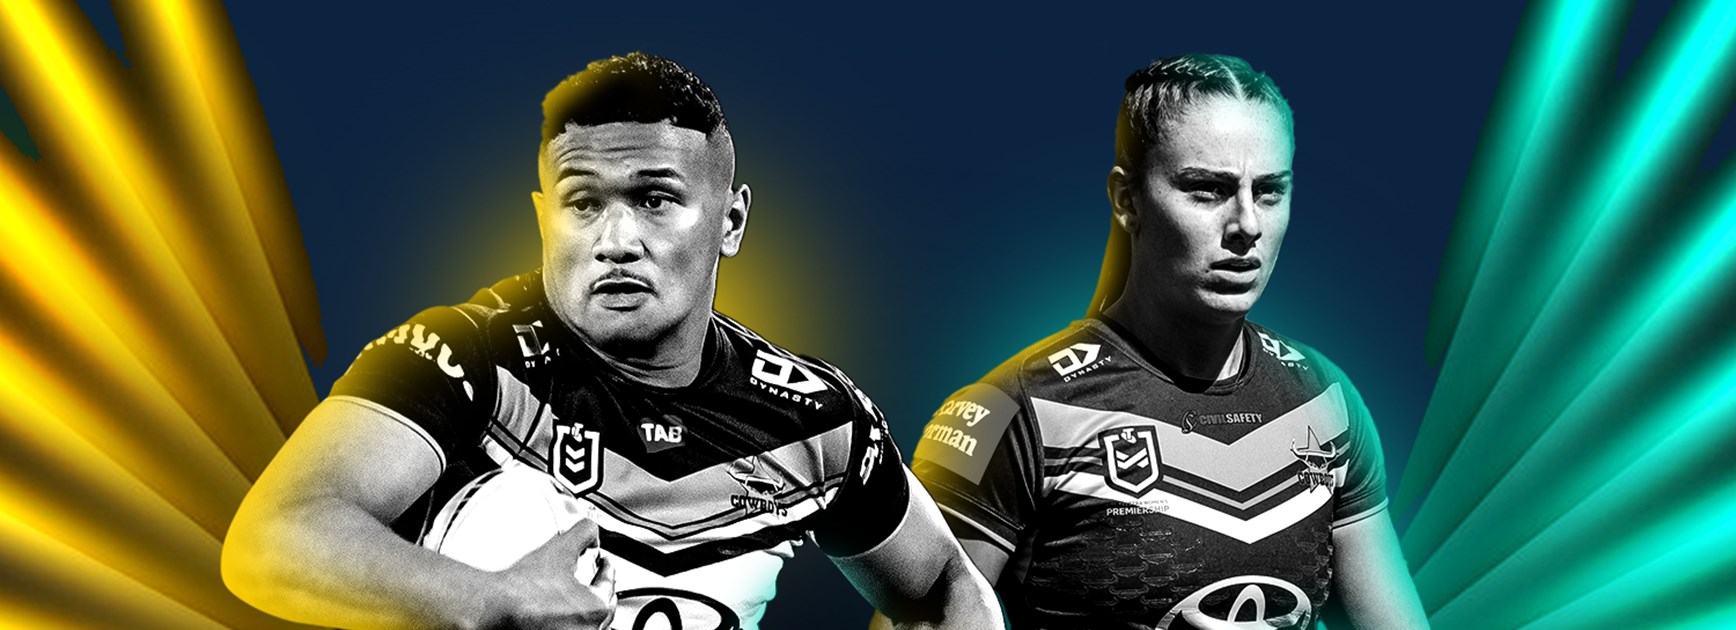 Finefeuiaki and Goldthorp crowned Rookies of the Year